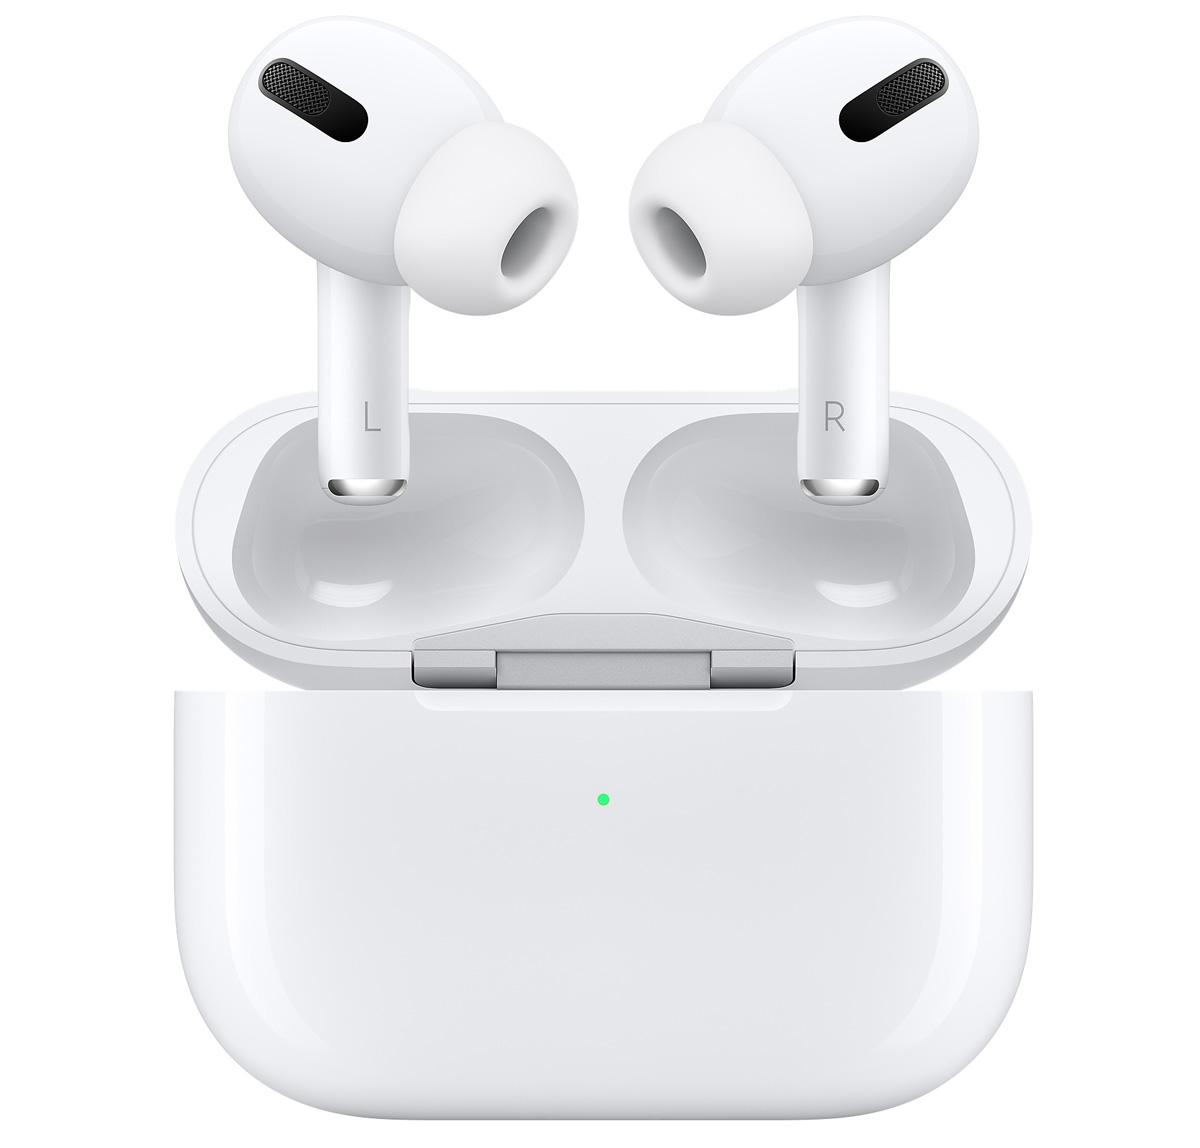 Refurb Apple AirPods Pro with Wireless Case for $126.65 Shipped